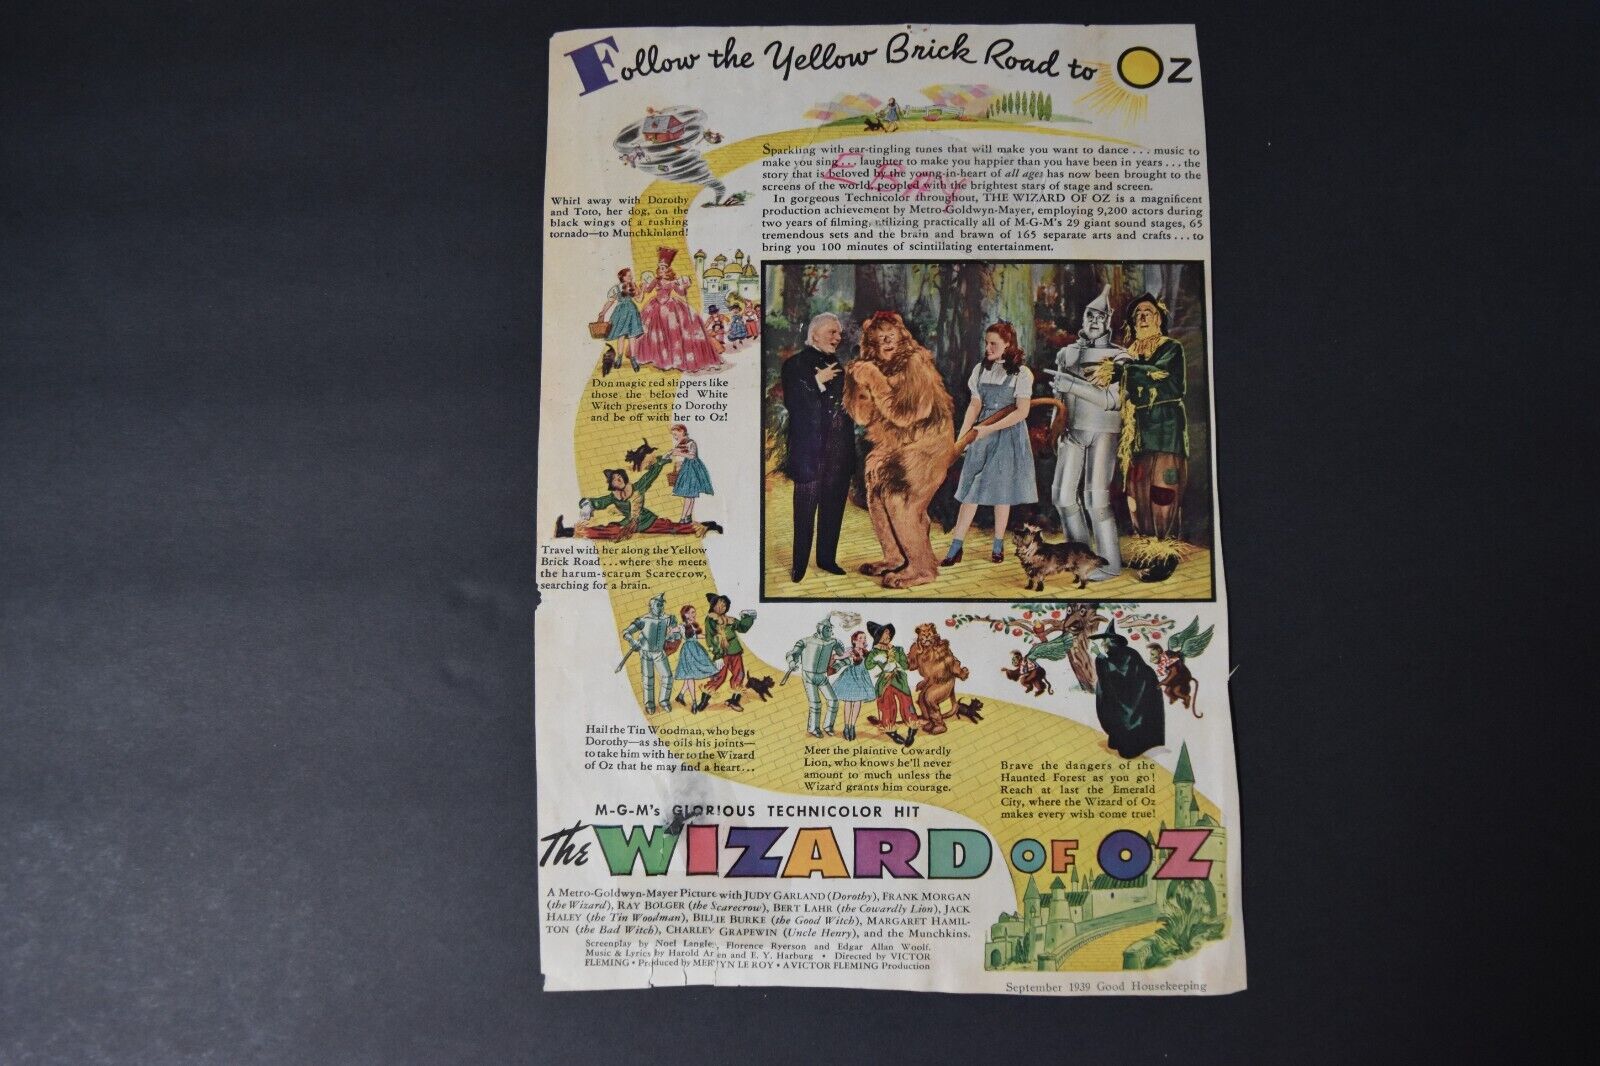 Original Wizard of Oz Vintage 1939 Print Ad from Good Housekeeping. Not Reprint